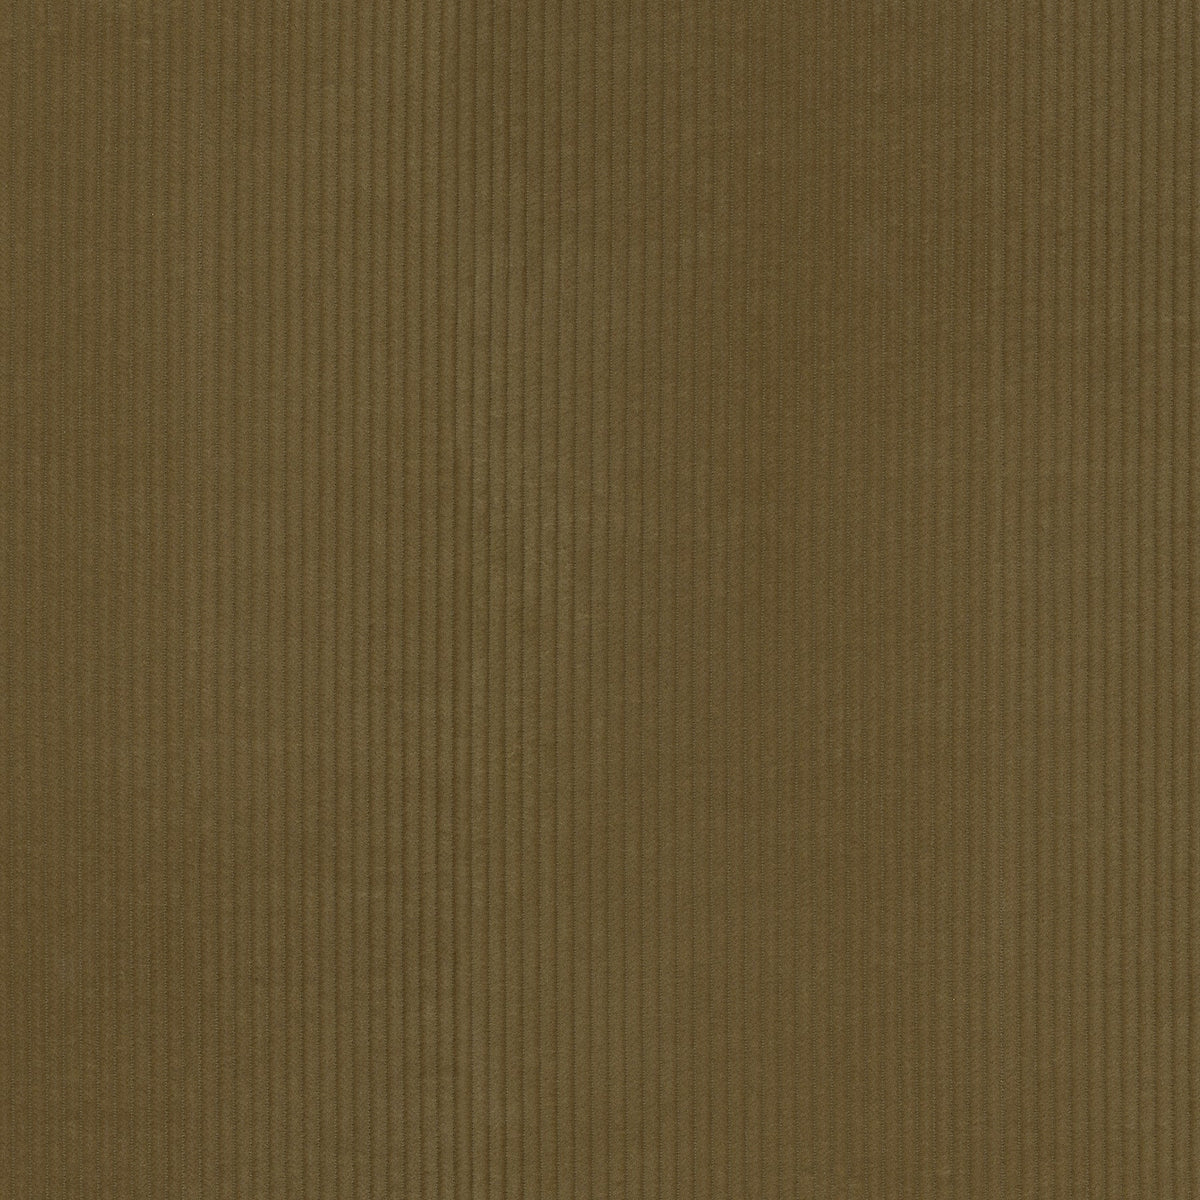 P/K Lifestyles Wales - Tobacco 412030 Fabric Swatch